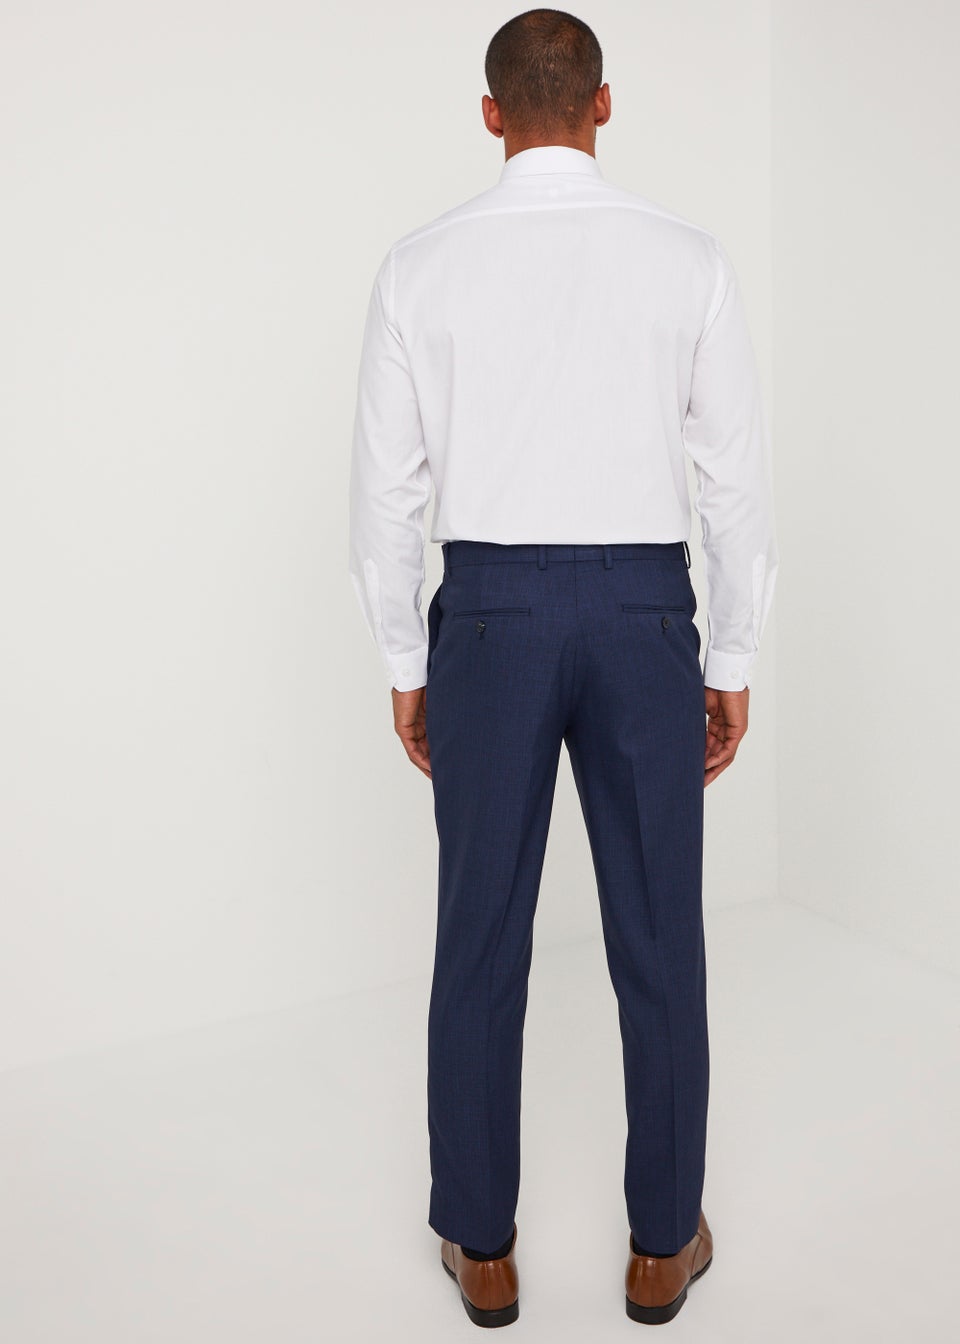 Taylor & Wright Cooper Navy Tailored Fit Suit Trousers